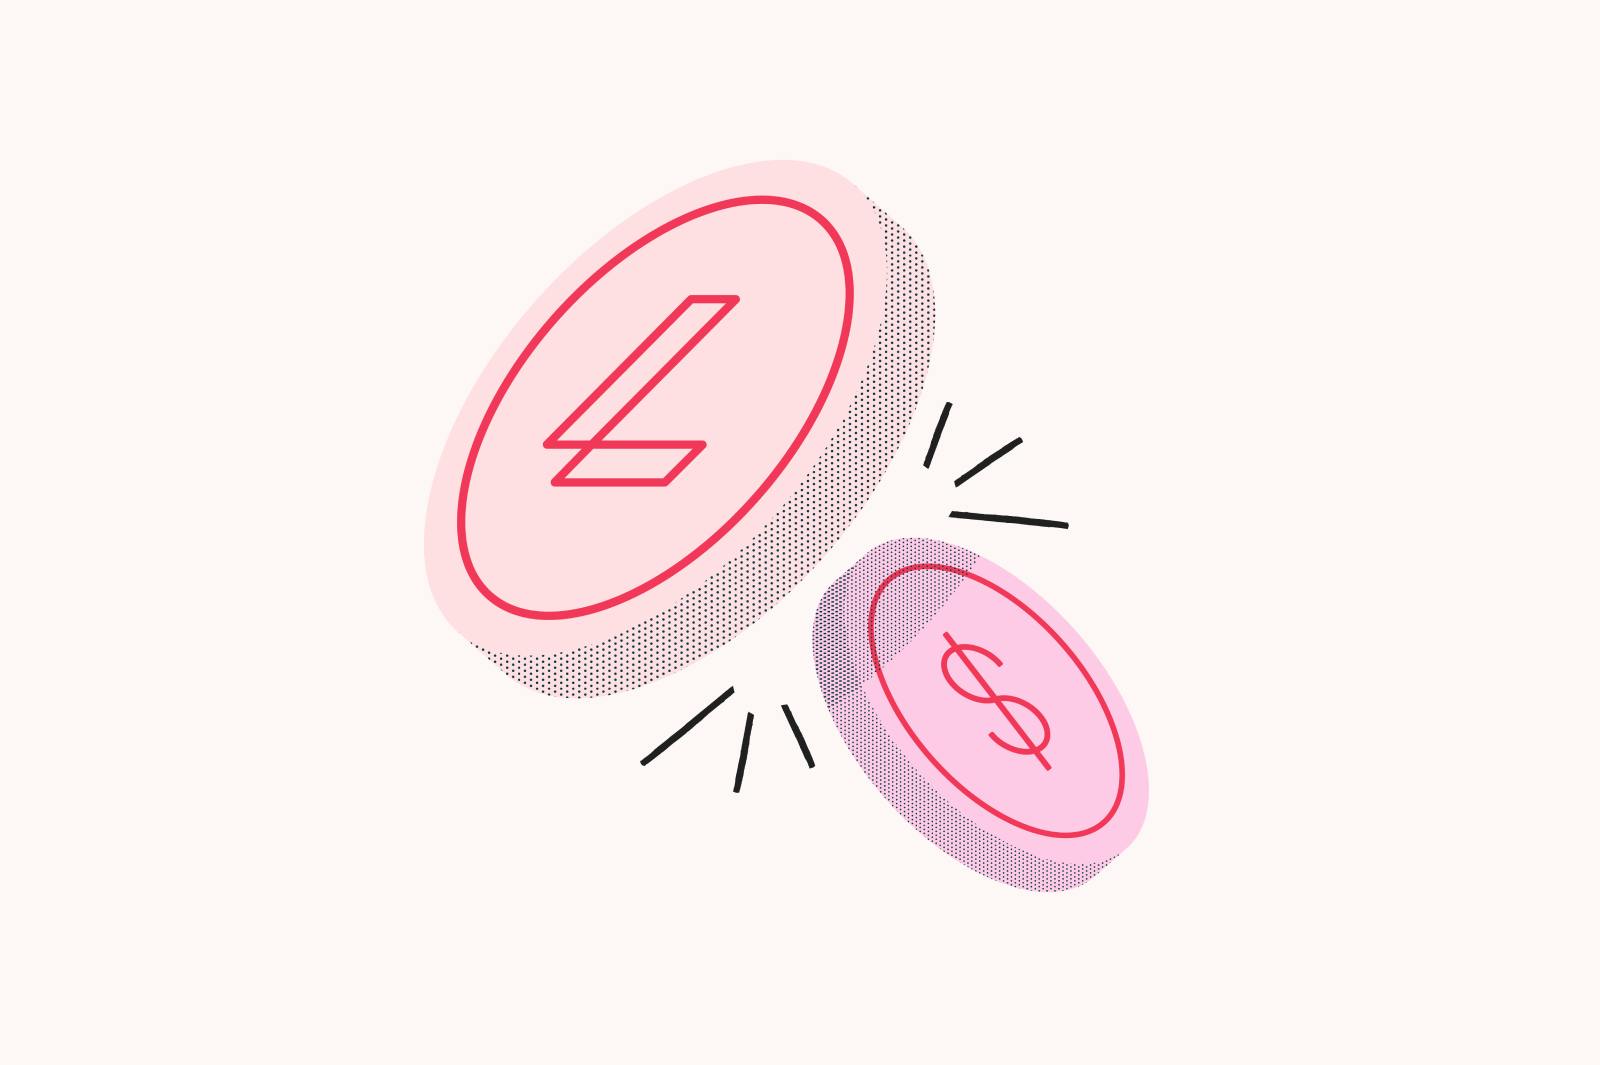 two coins collide with each other - one is a light red and bears the Lumin logo. The other is pink and has a dollar sign on it.